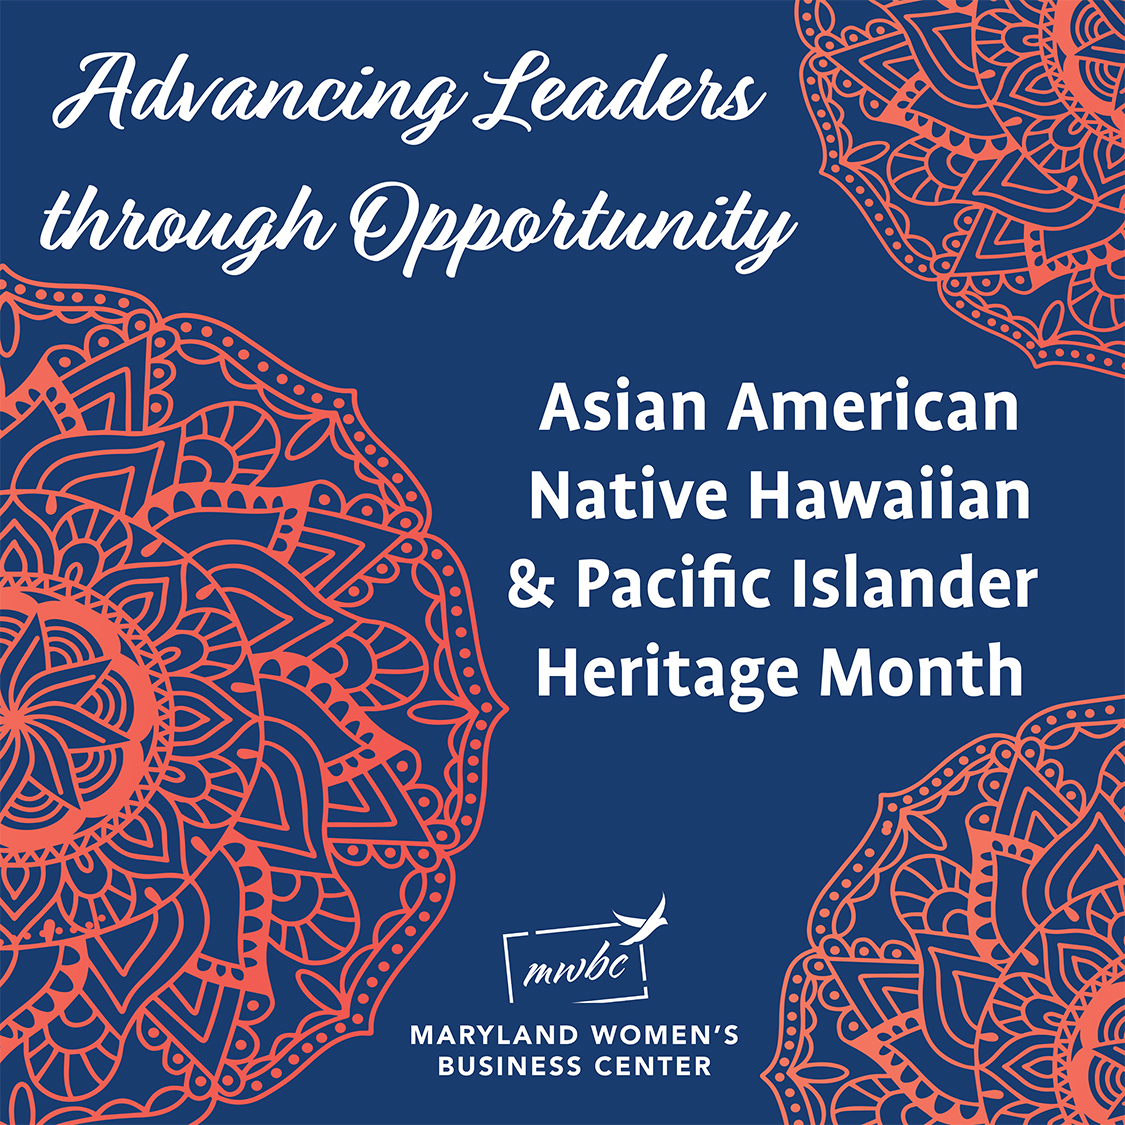 AANHPI Heritage Month Advancing Leaders through Opportunity Maryland